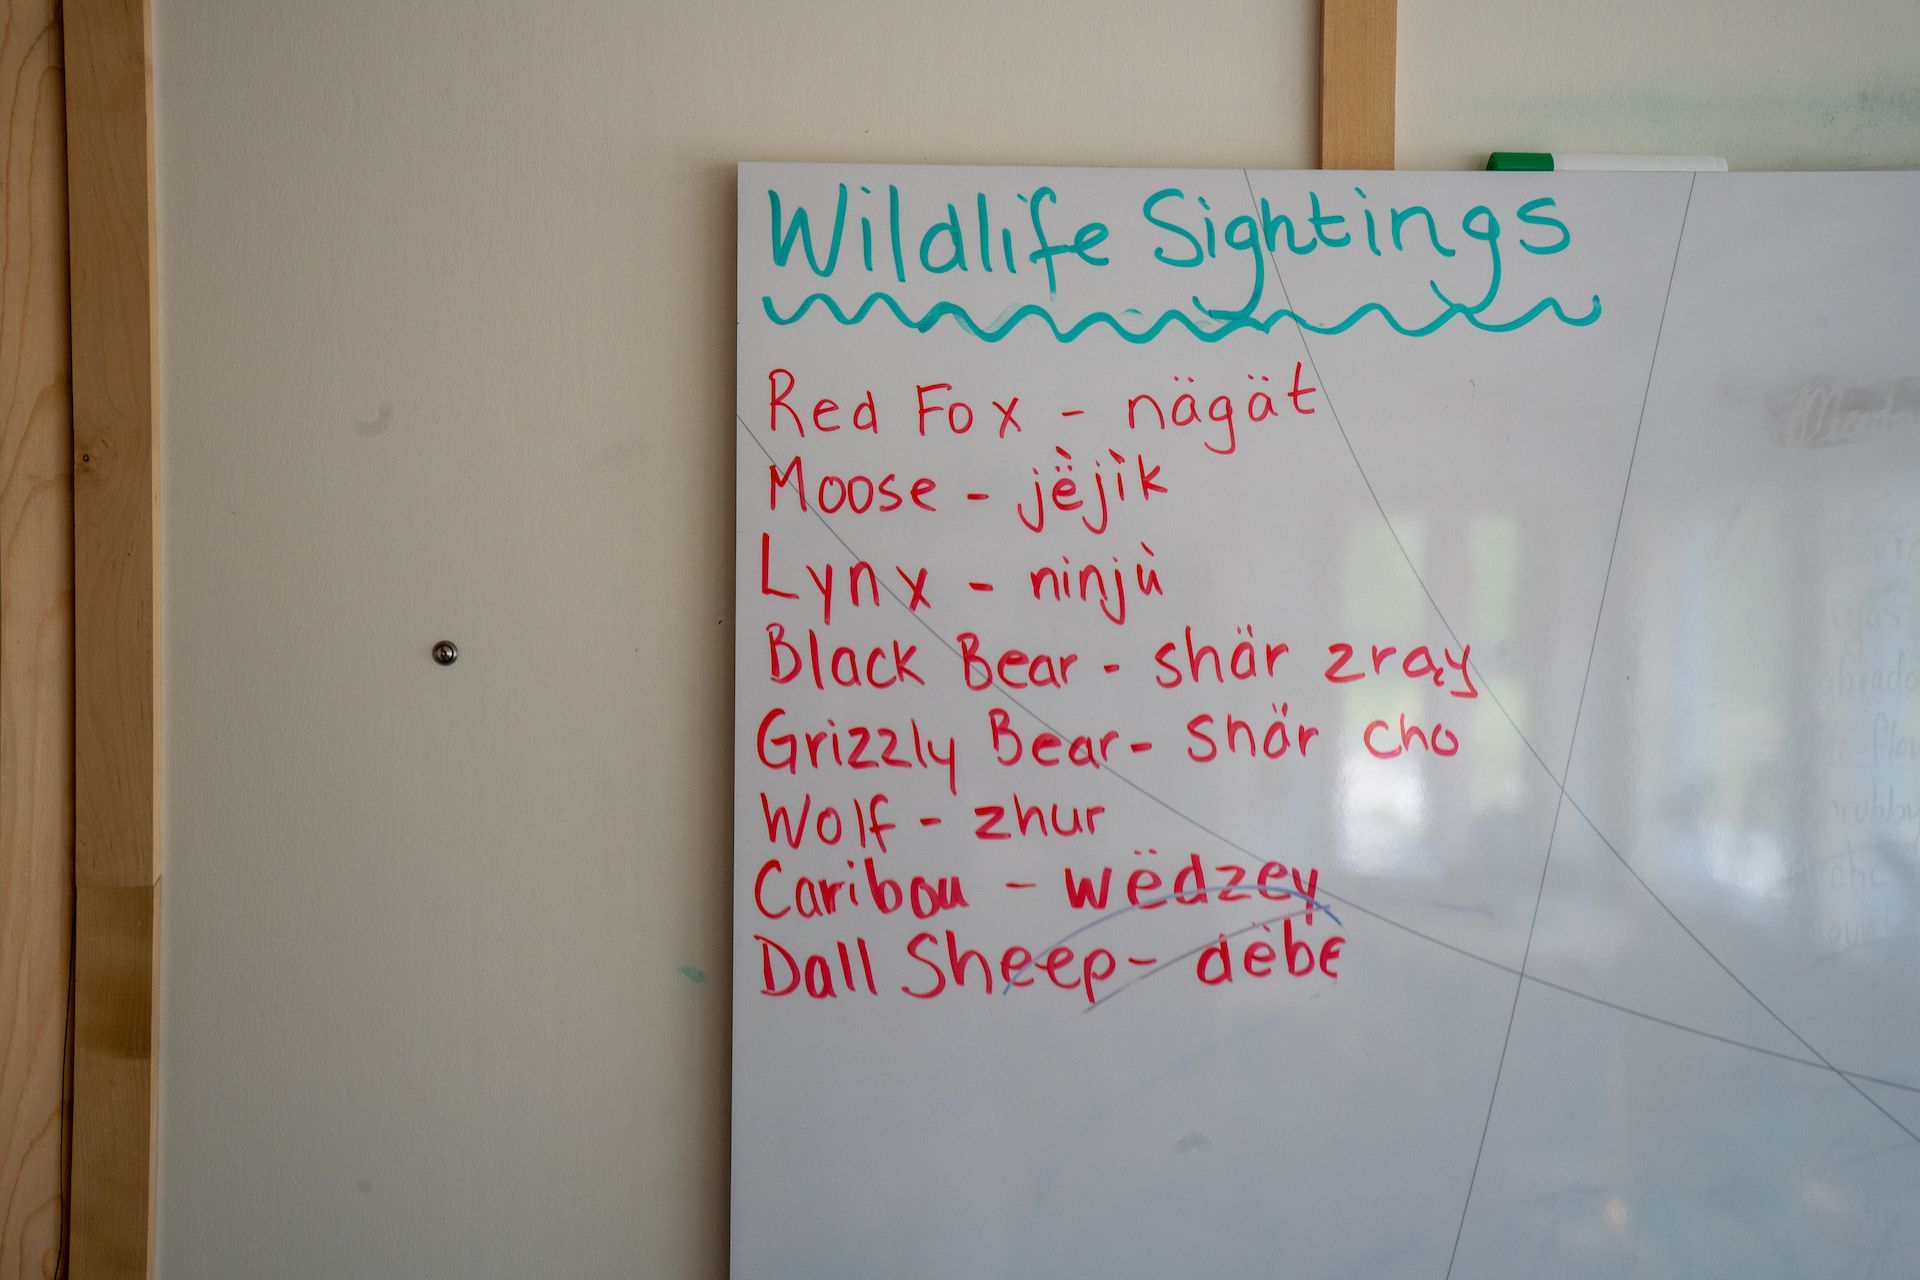 Wildlife sightings and their native language names